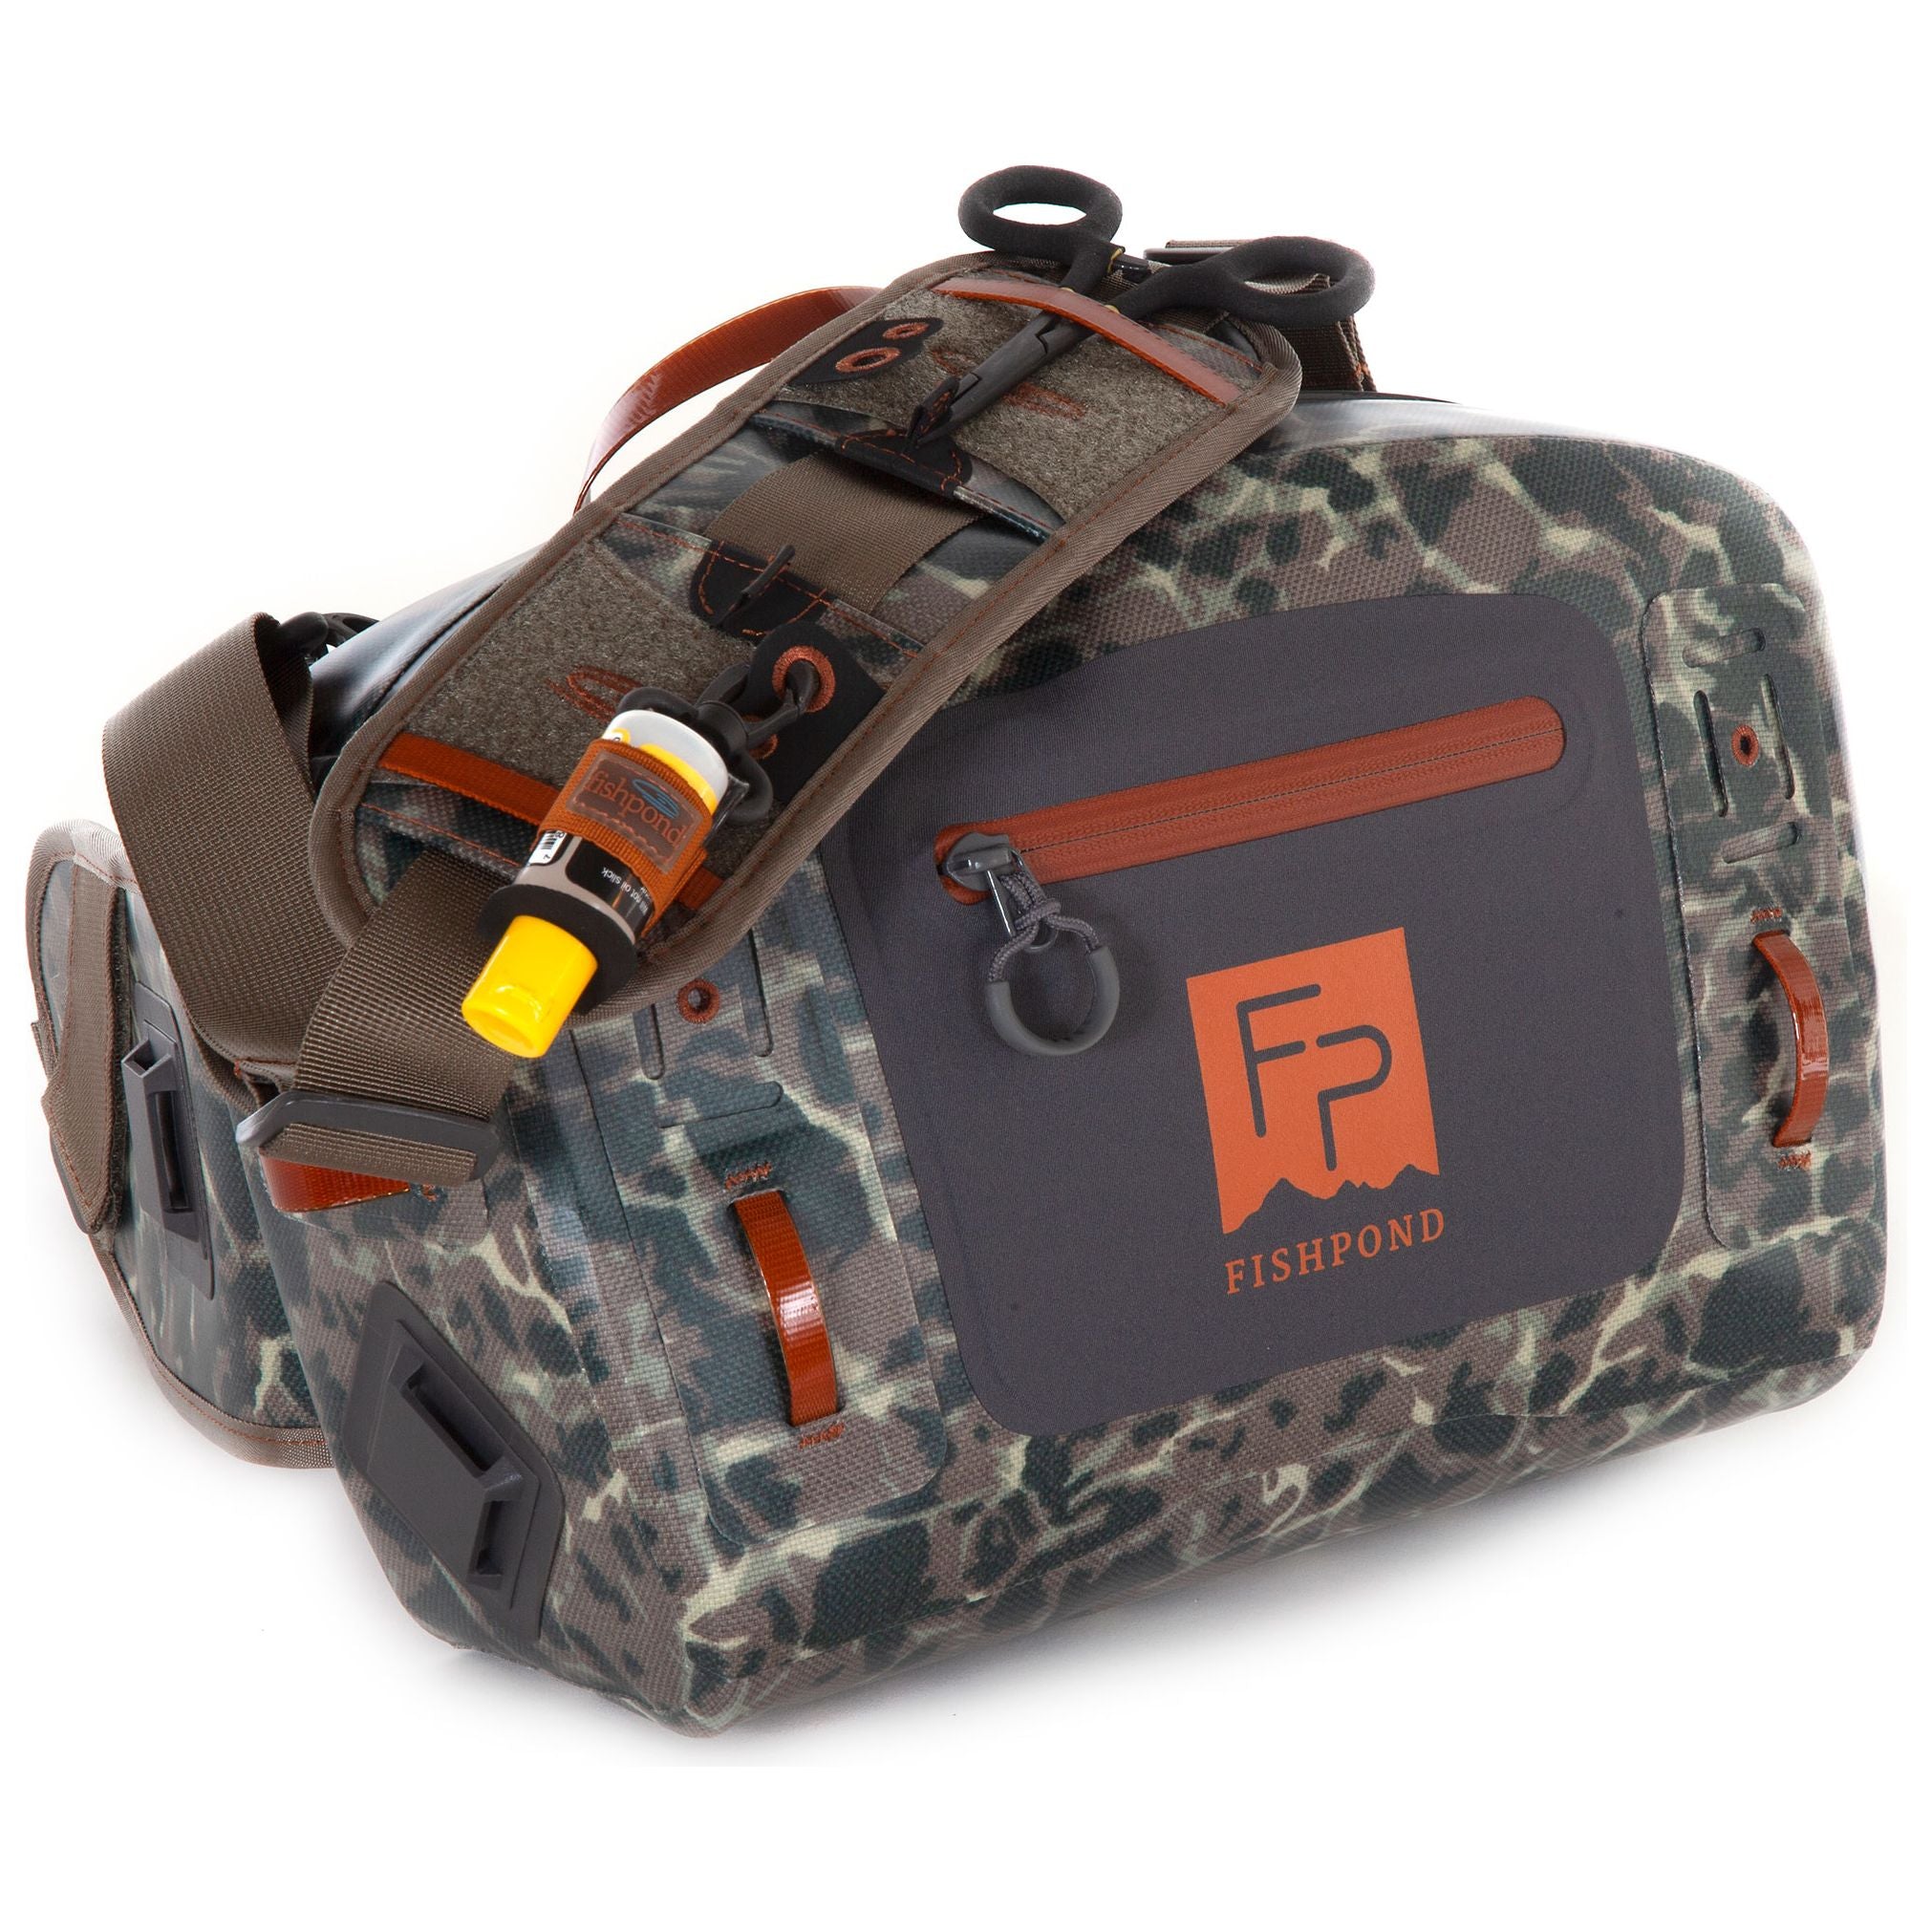 Fishpond Thunderhead Submersible Lumbar Pack Eco Riverbed Camo Image 01